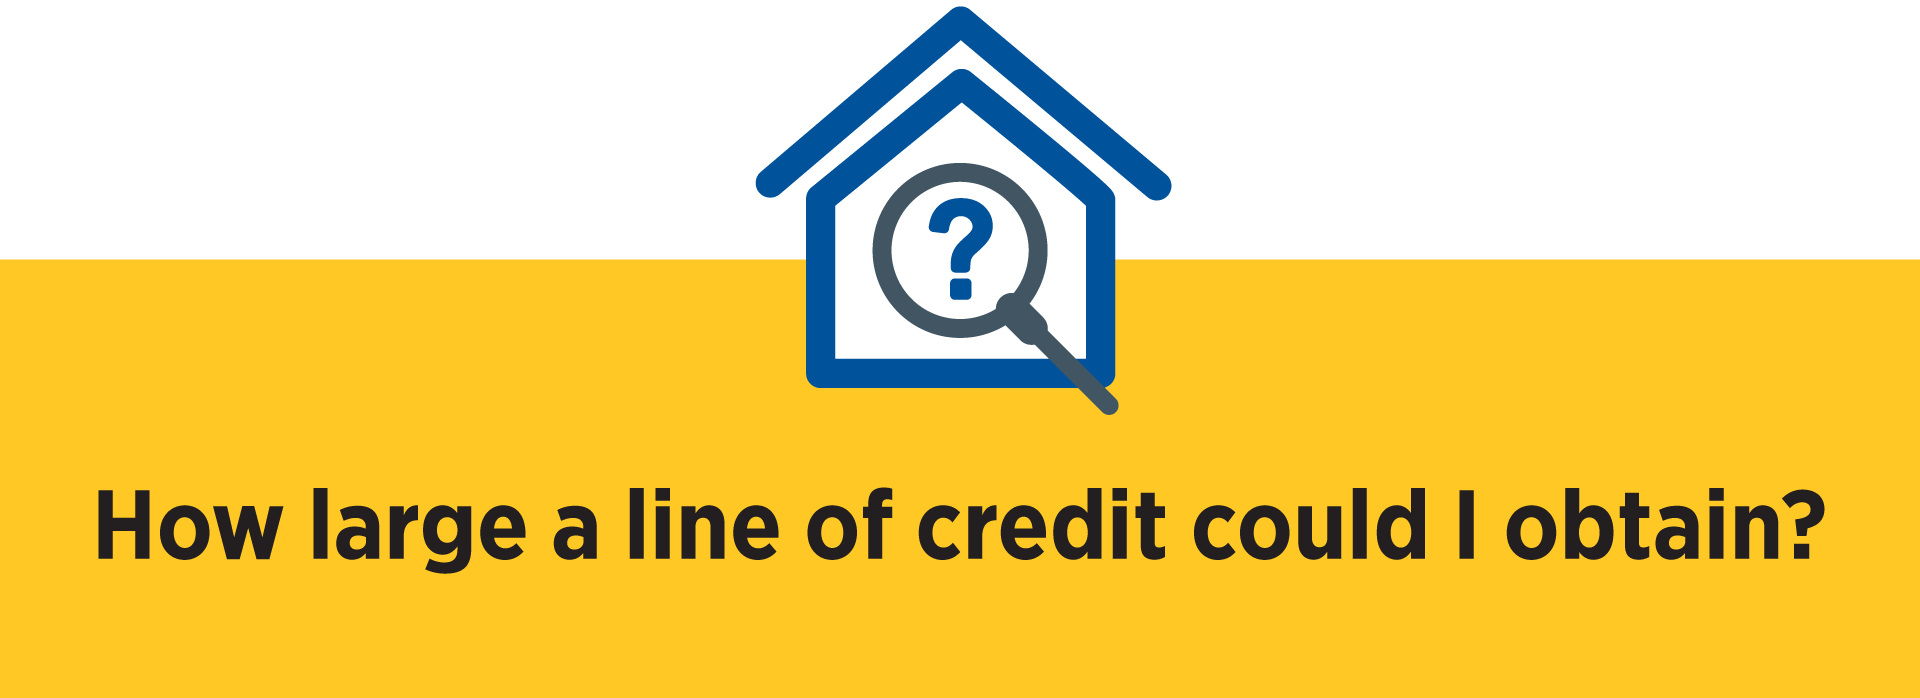 How large a line of credit could I obtain?